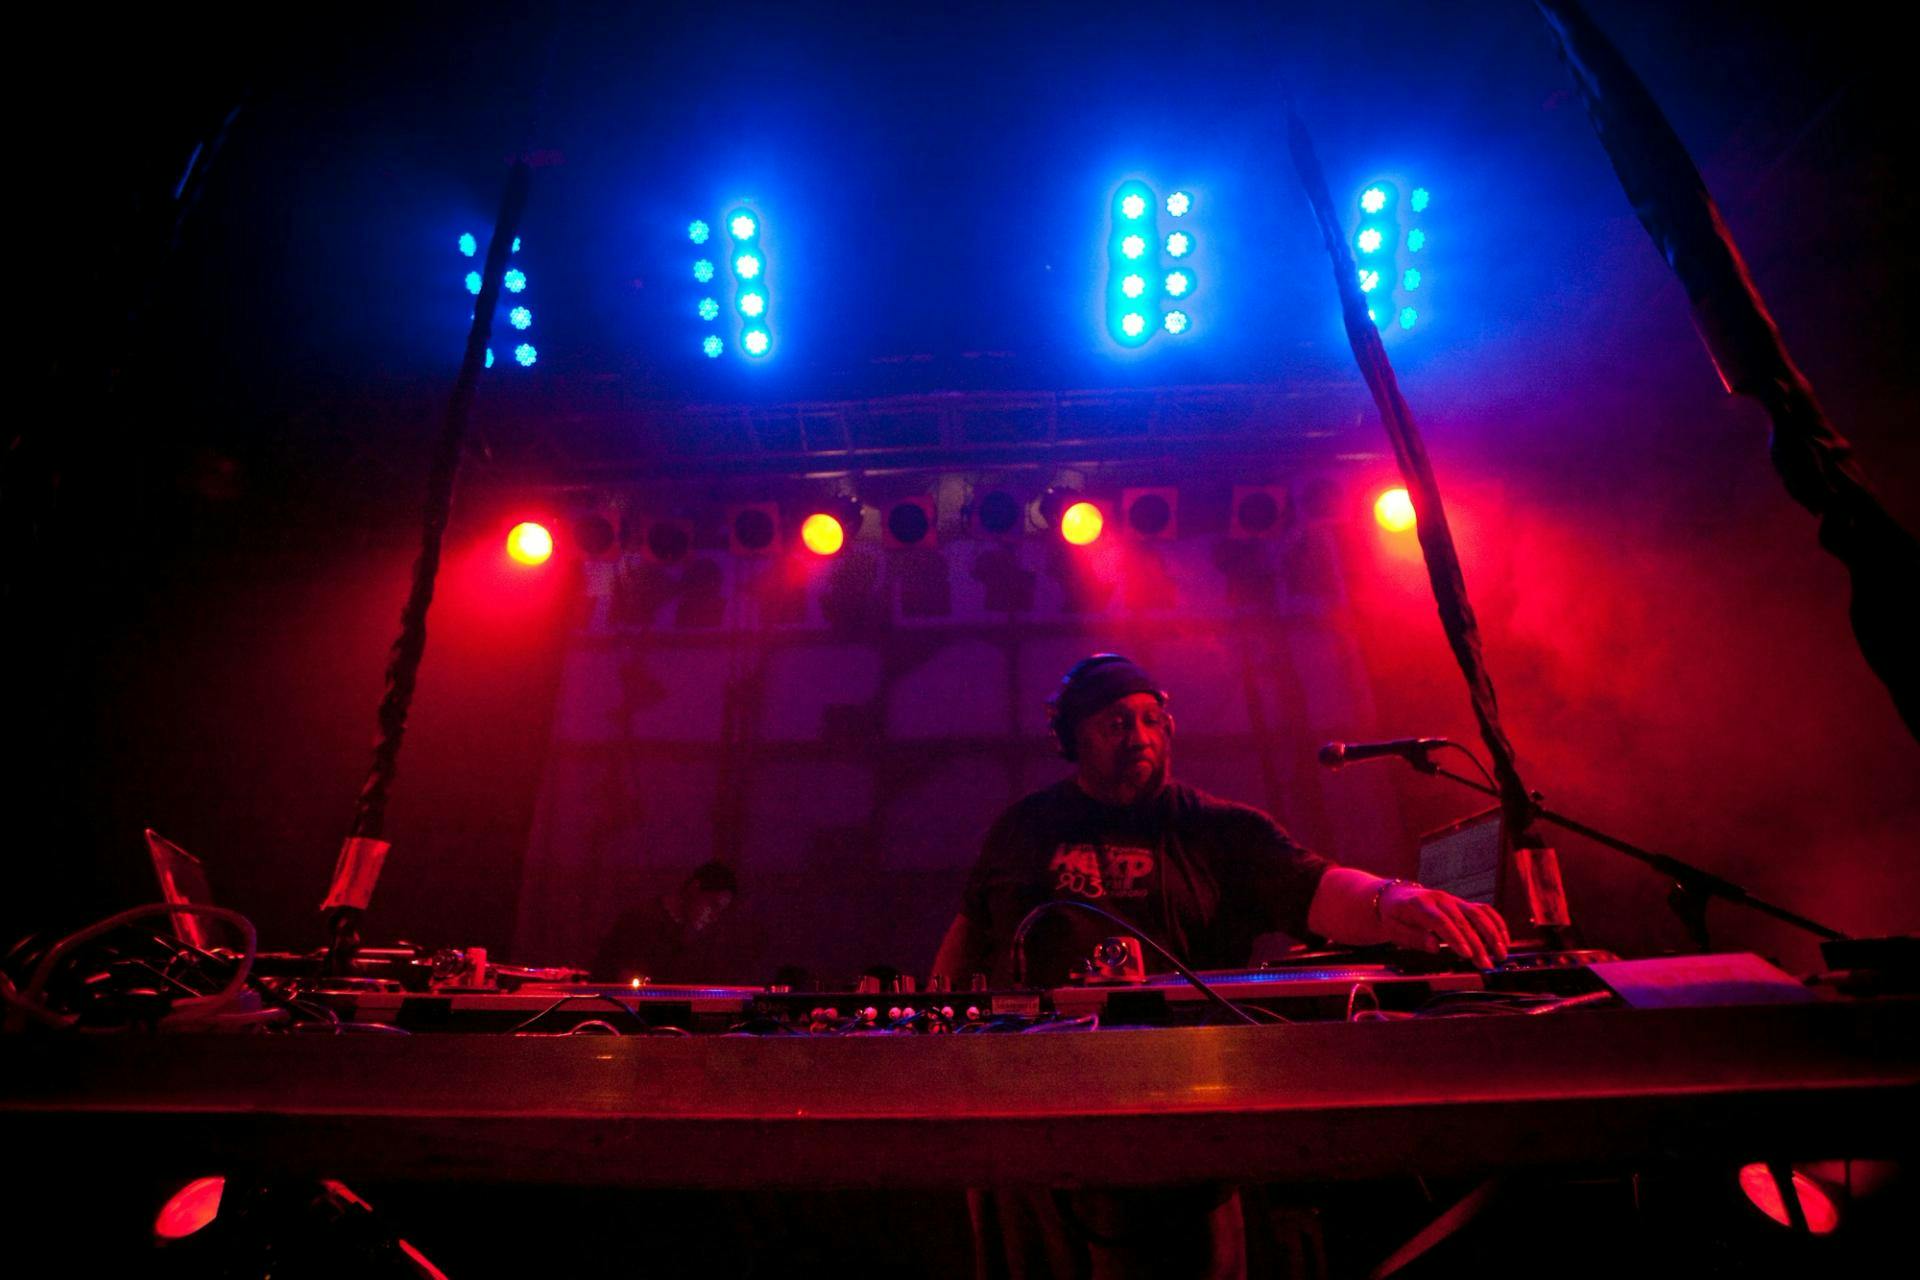 Riz Rollins in the DJ booth, bathed in red and blue light